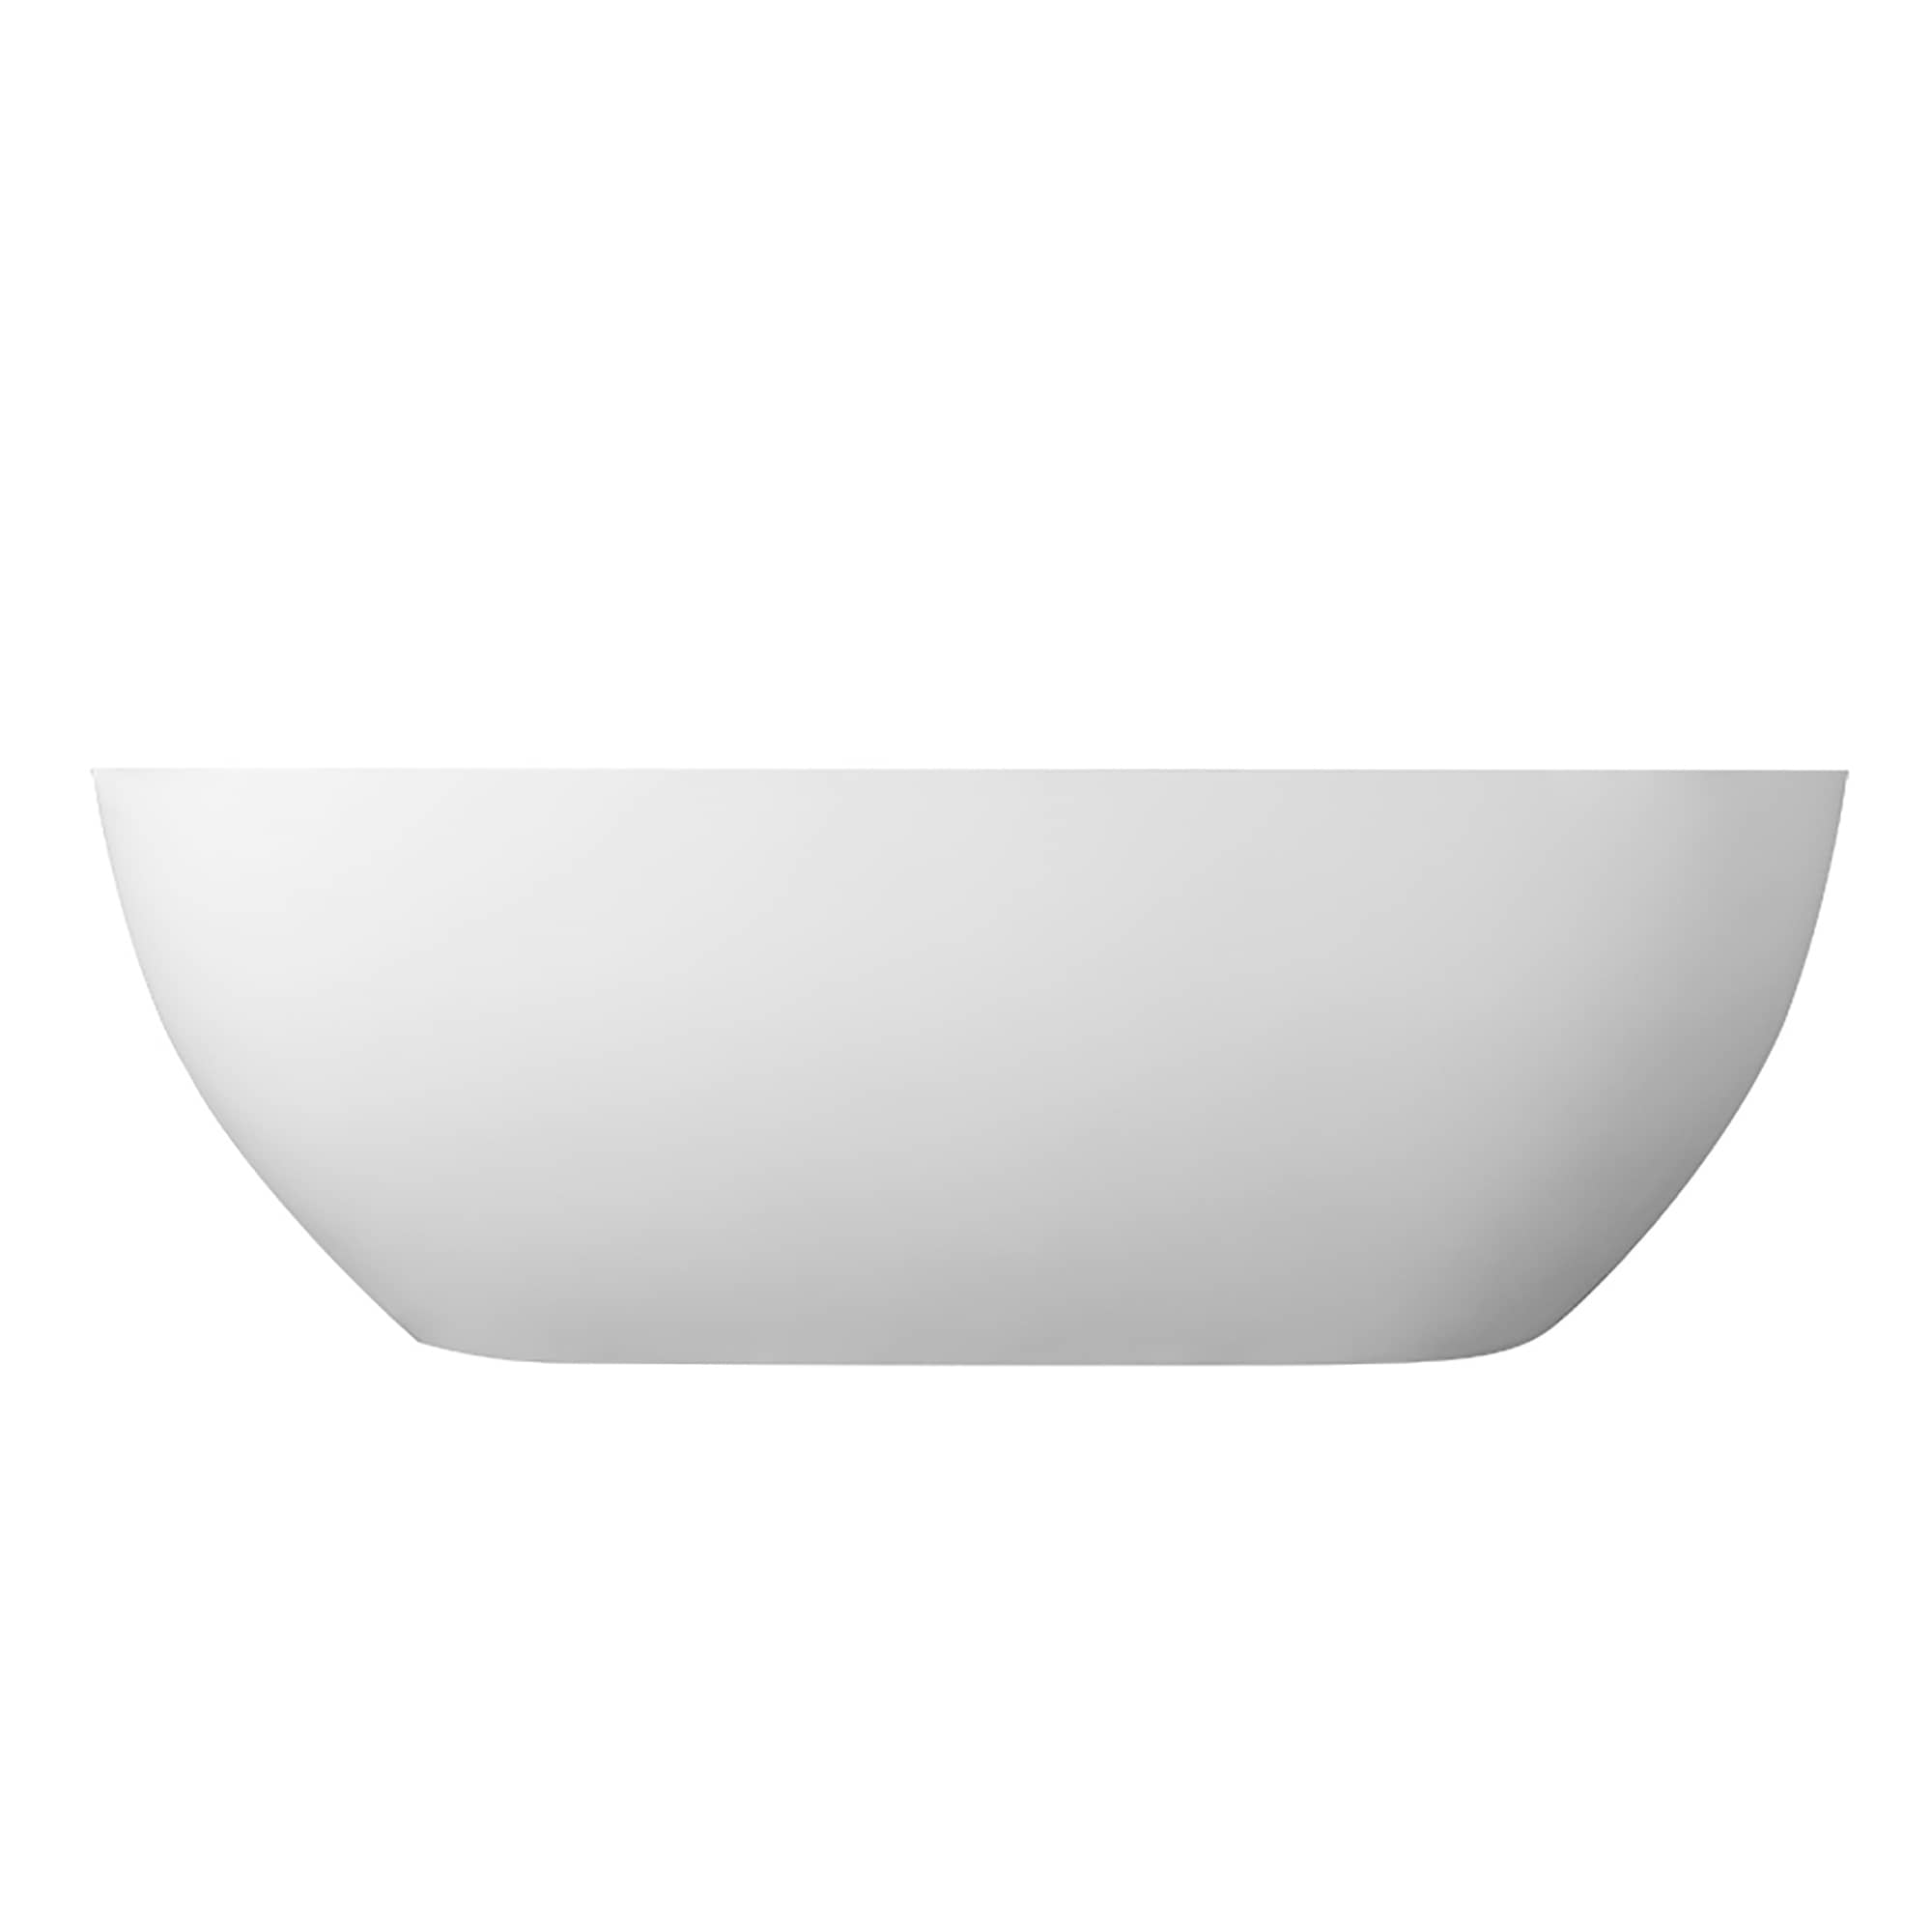 CASAINC 59 in. Solid Surface Free-Standing Bathtub with Centre Drain in Matte White